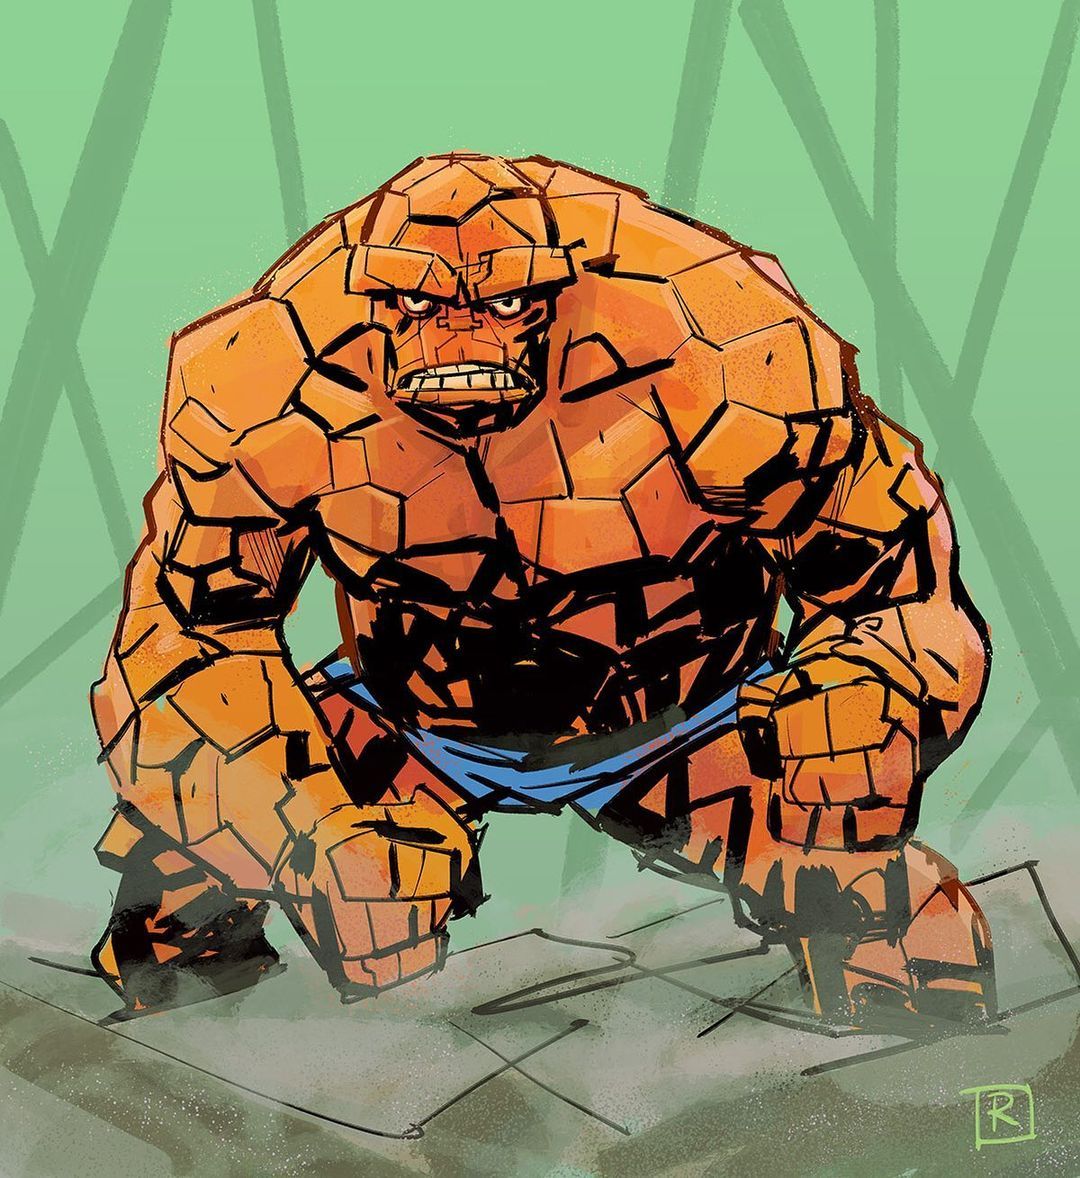 It’s clobberin’ time!
-
#thething #marvelcomics #sketchbook #characters #charactersketch #comics #comicartist #comicartwork #comicartists #comicartistsoninstagram #digitalsketch #photoshop...